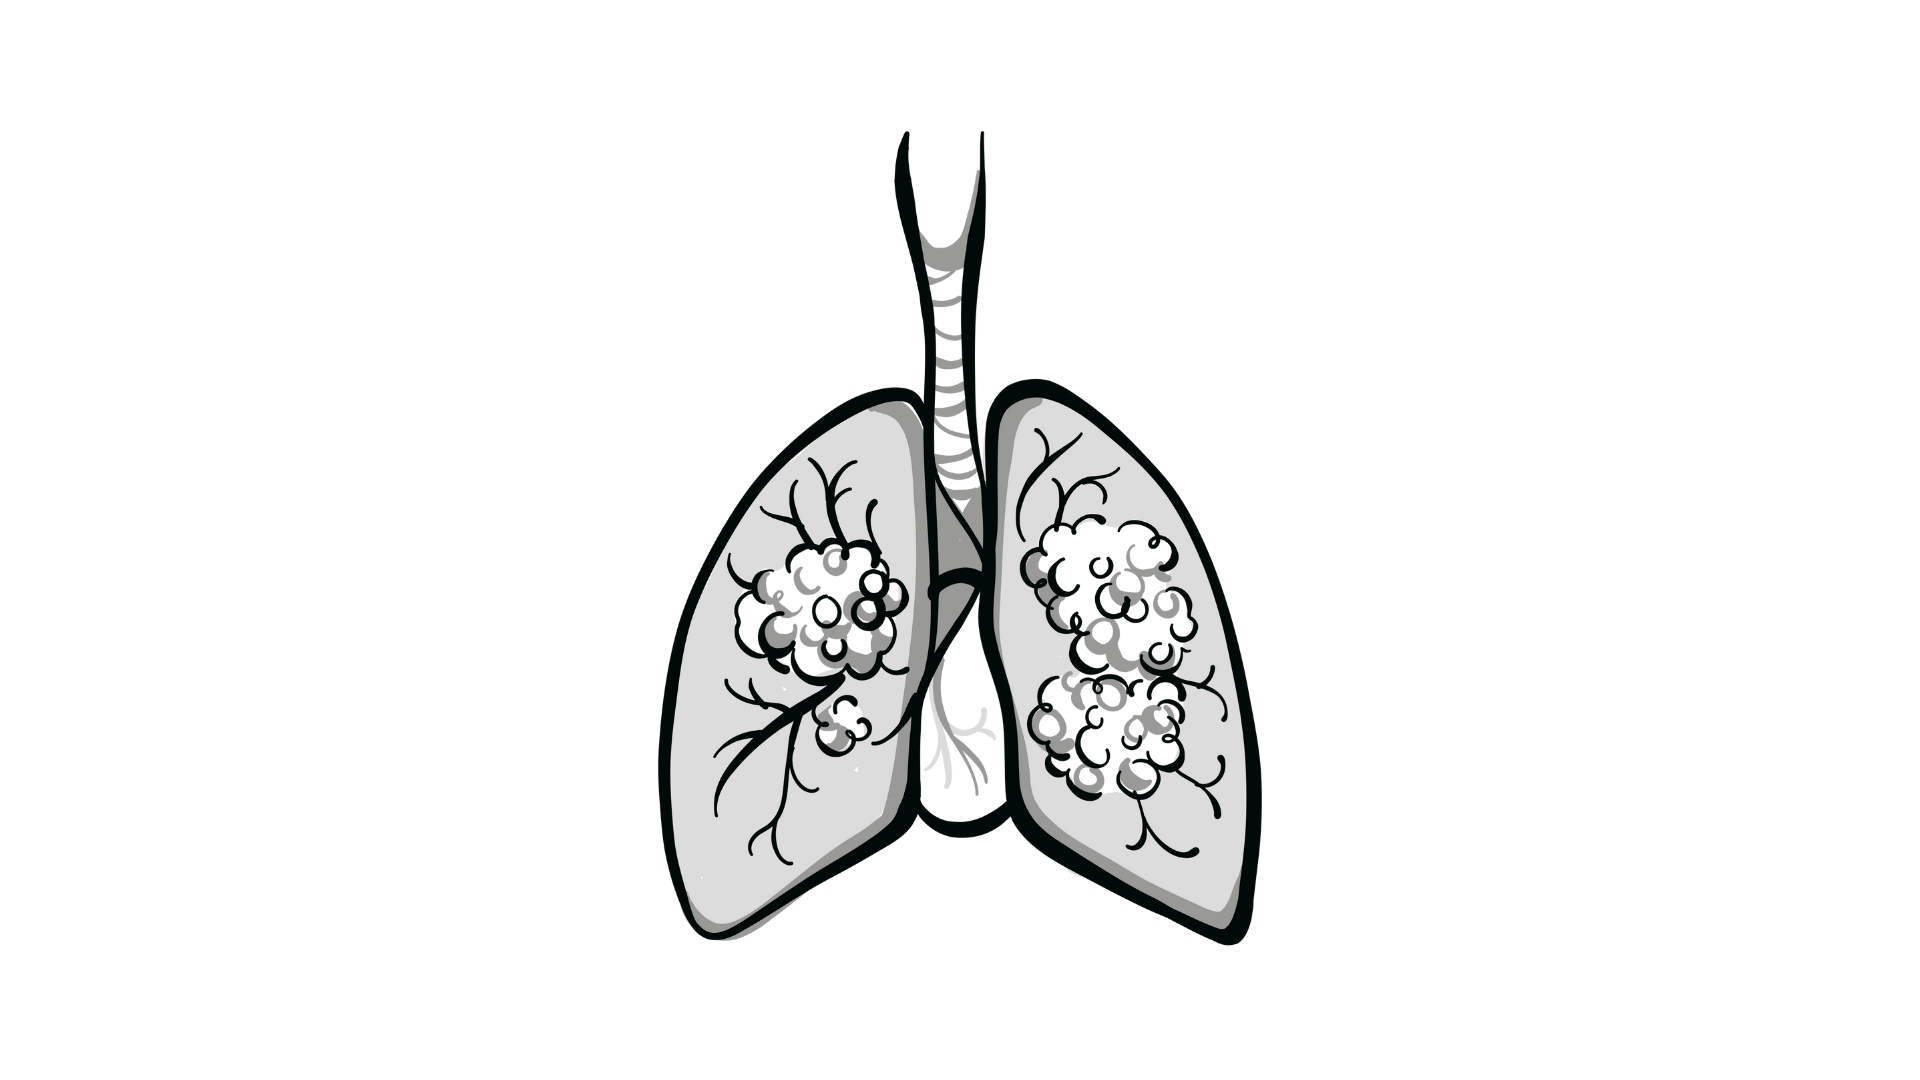 ALCHEMIST Findings Suggest Need to Optimize Proven Therapies in Early-Stage NSCLC